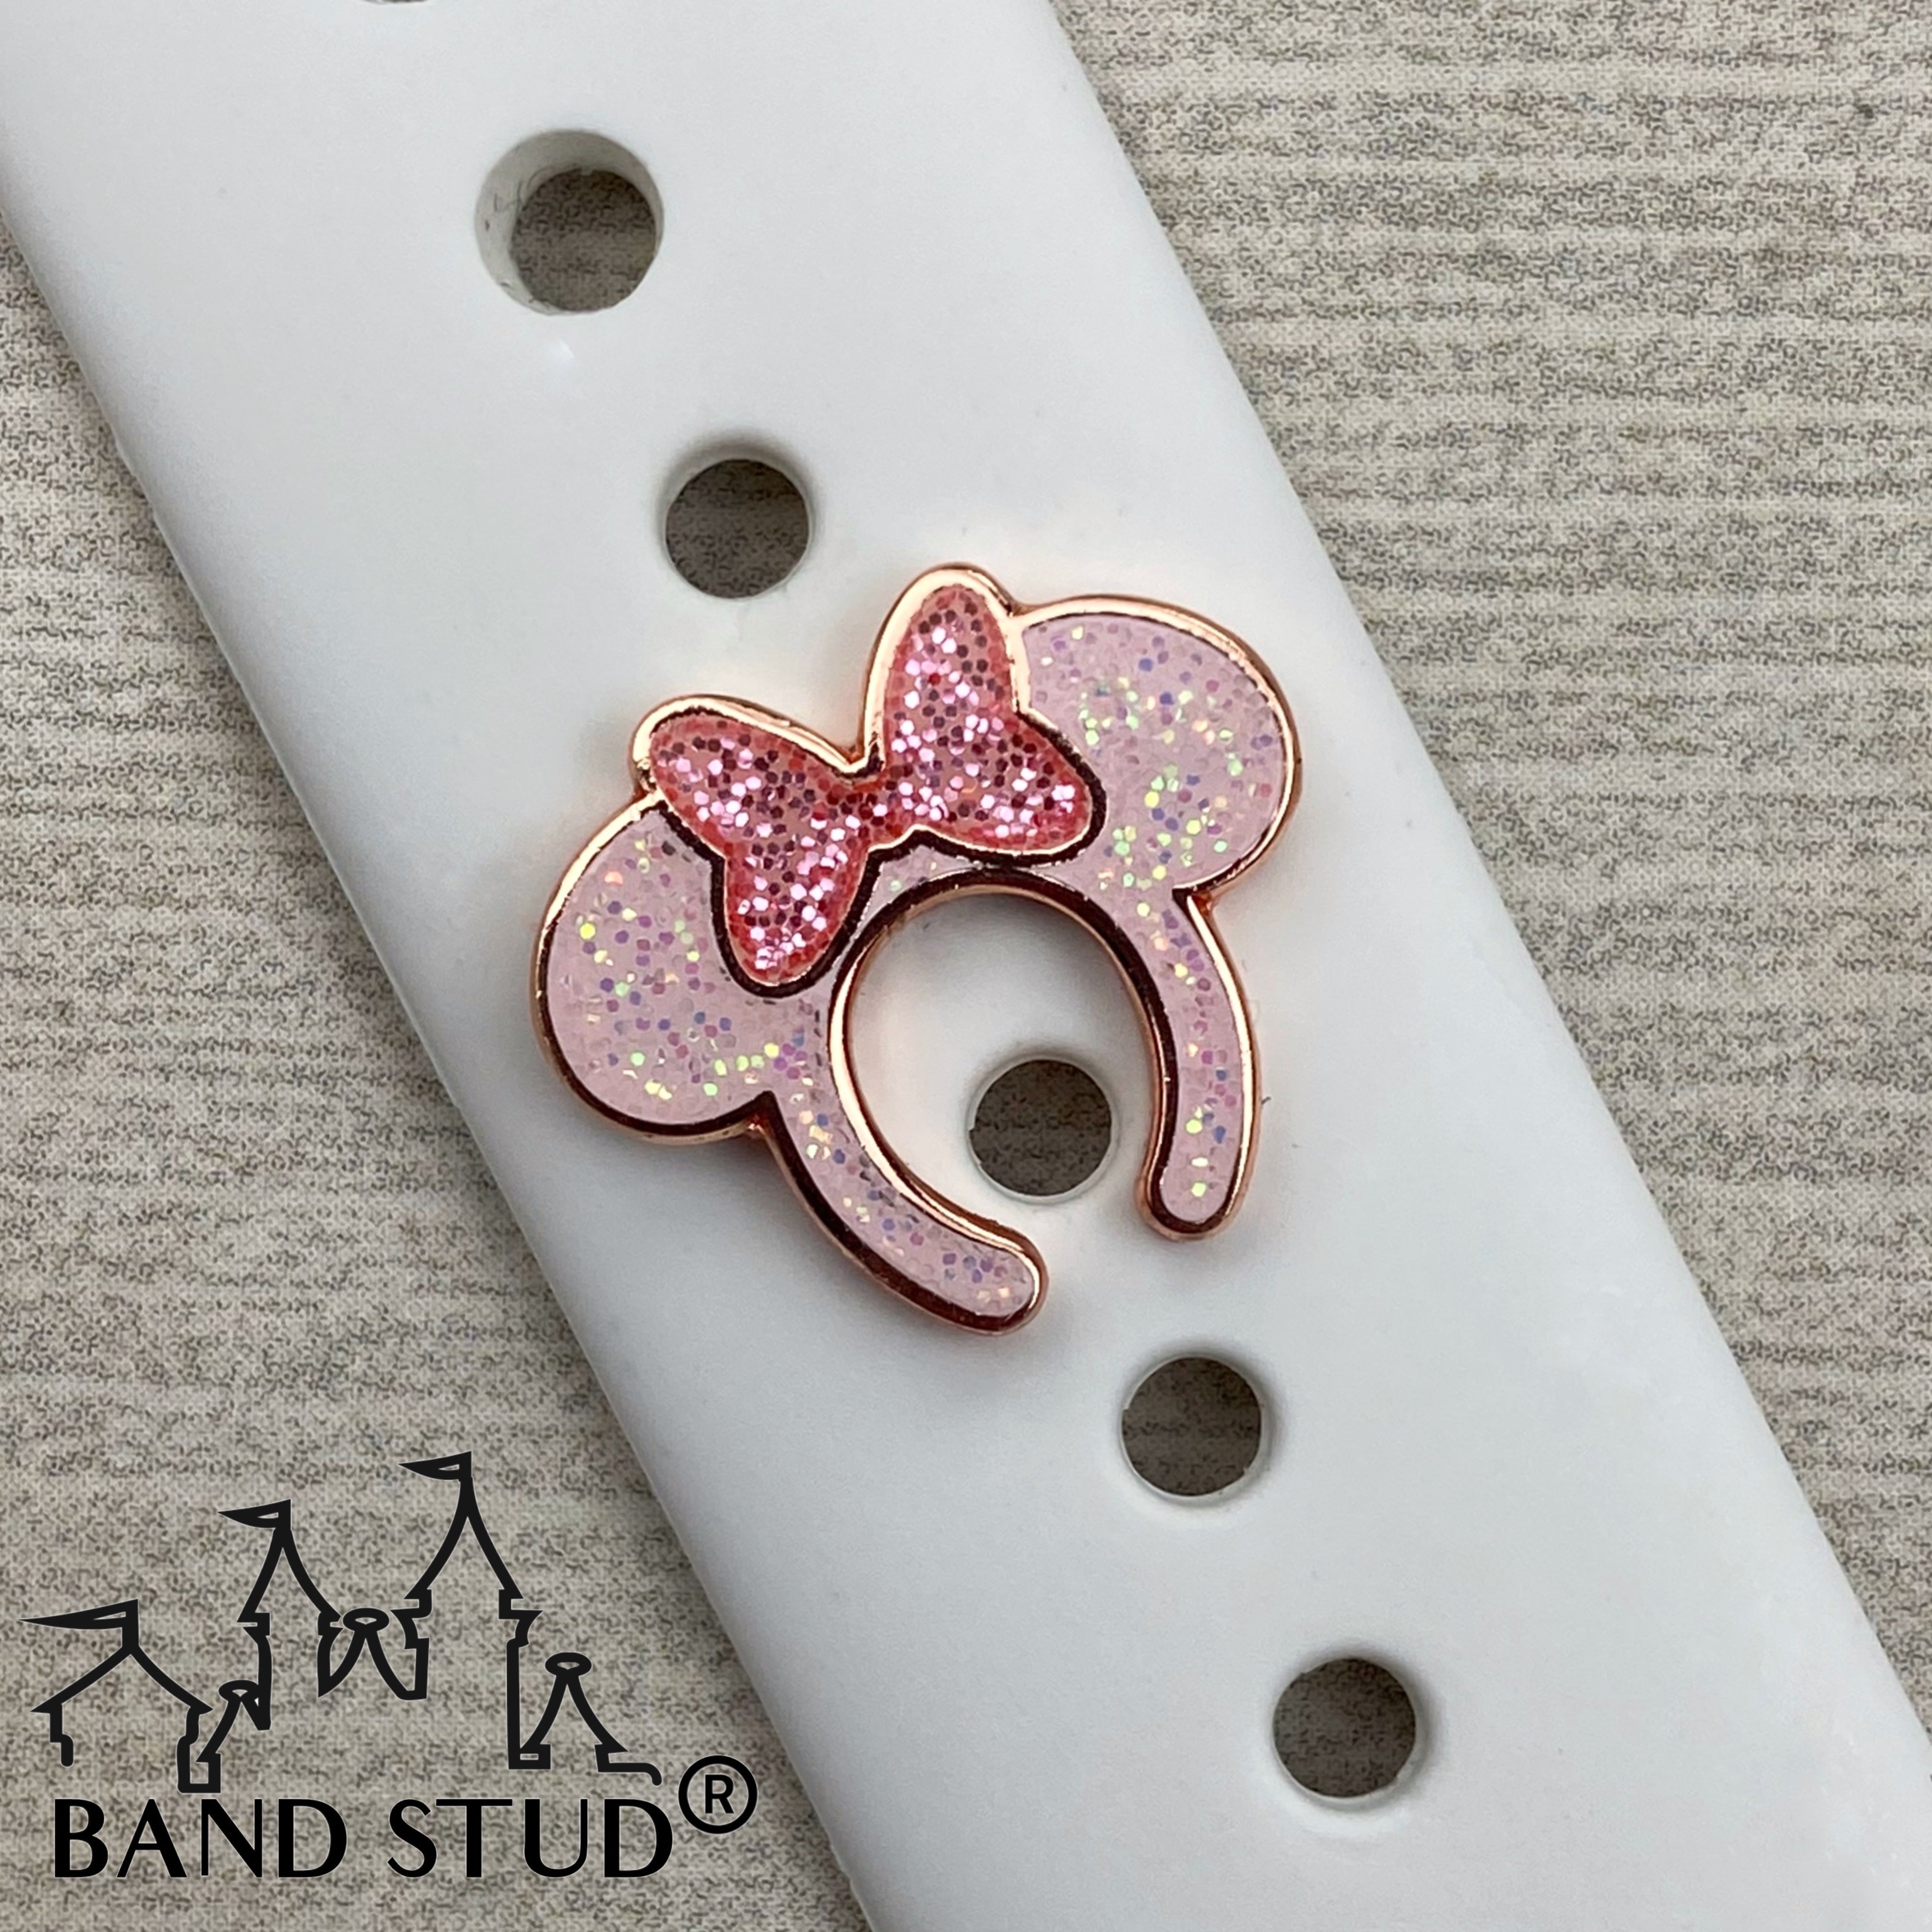 Band Stud® - Miss Mouse Ears - Pretty in Pinks